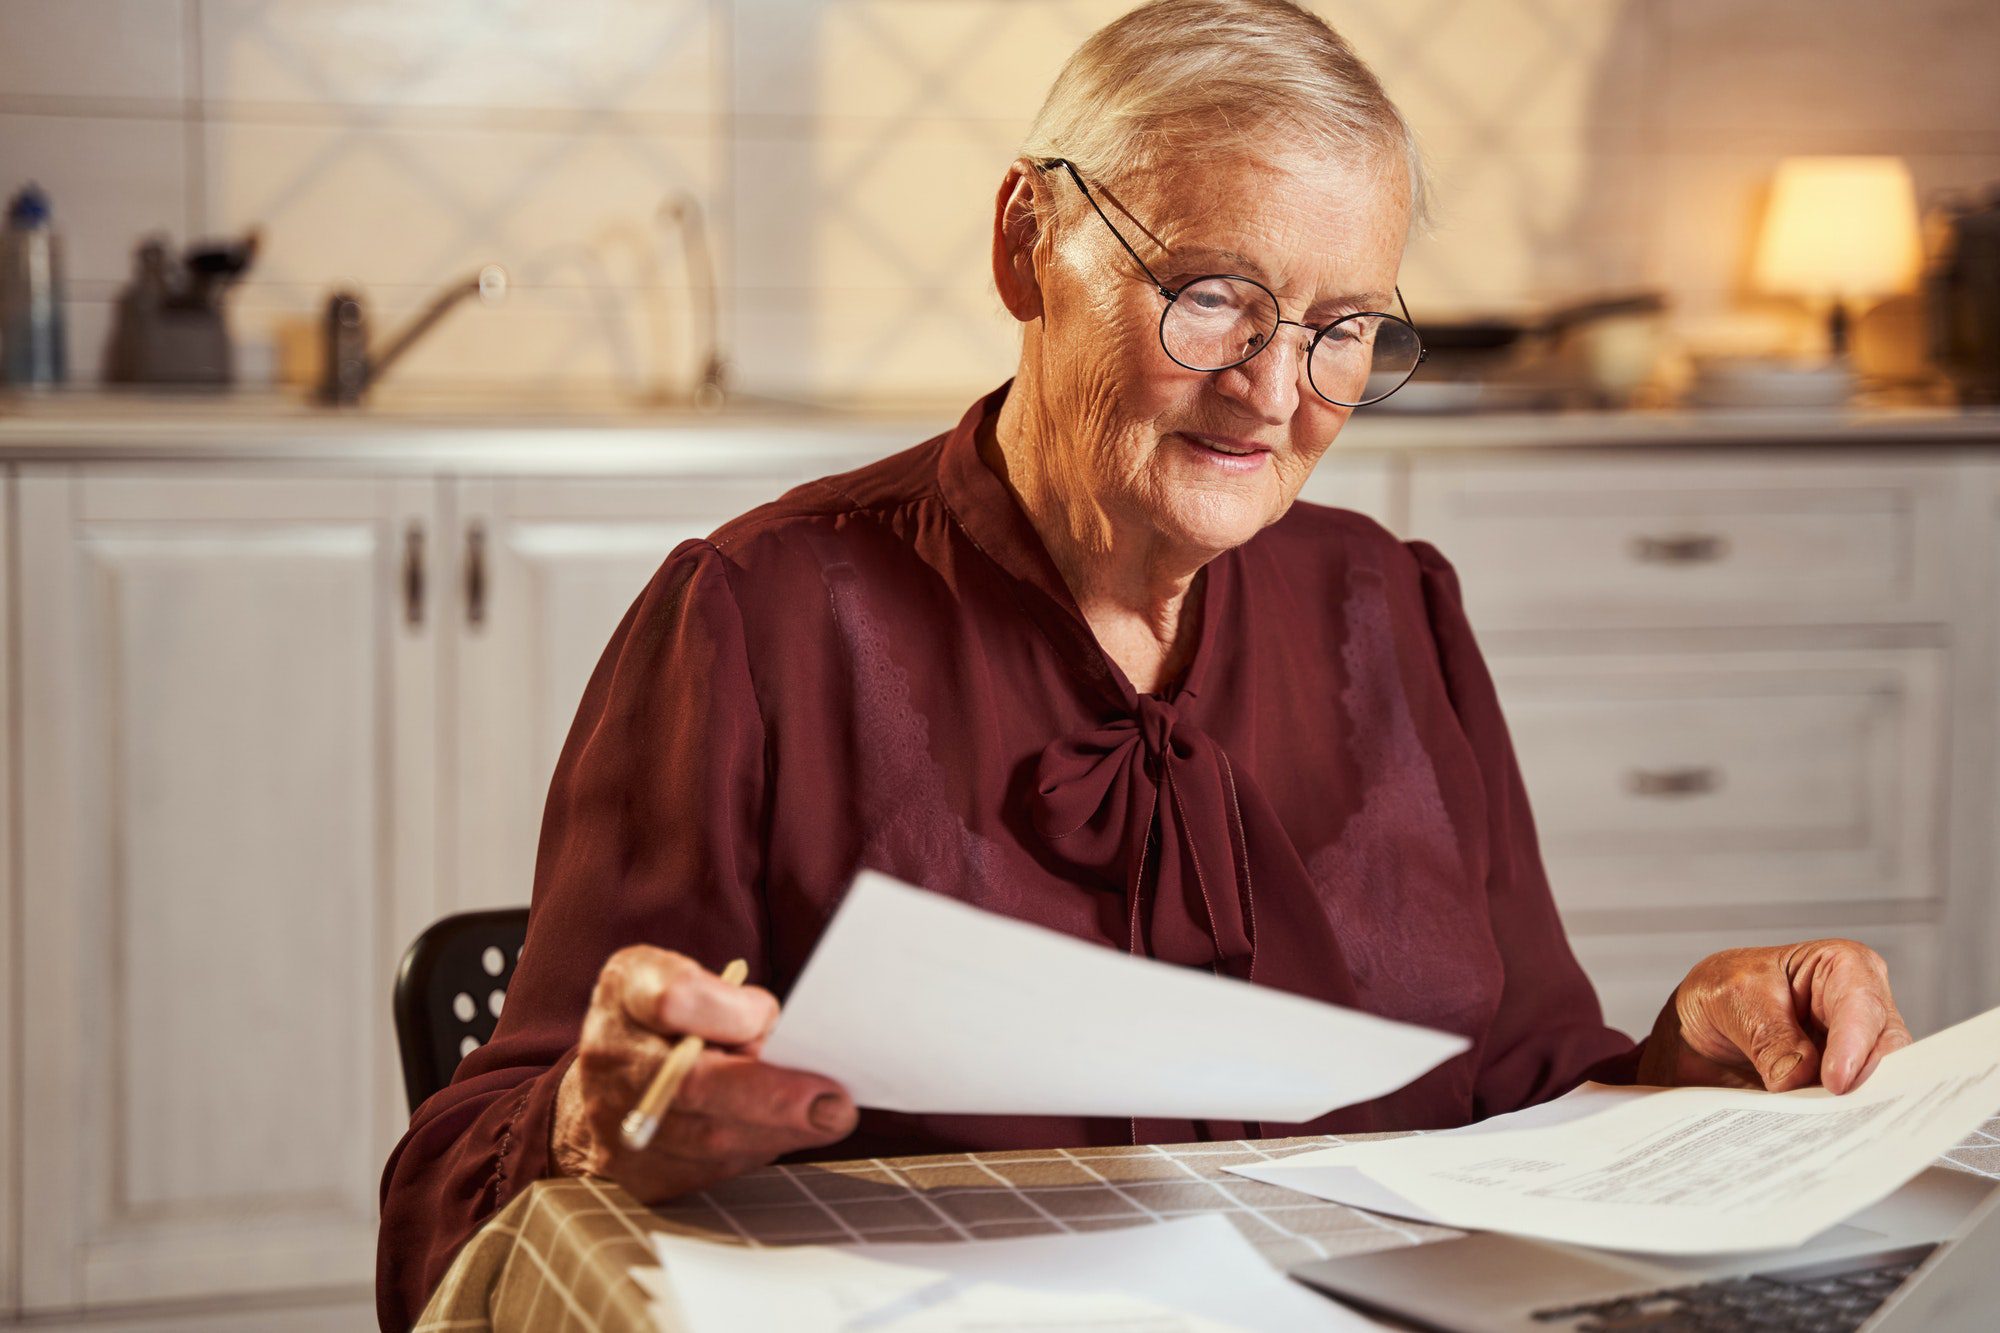 Senior woman comparing Medicare Plans to determine which is right for her.